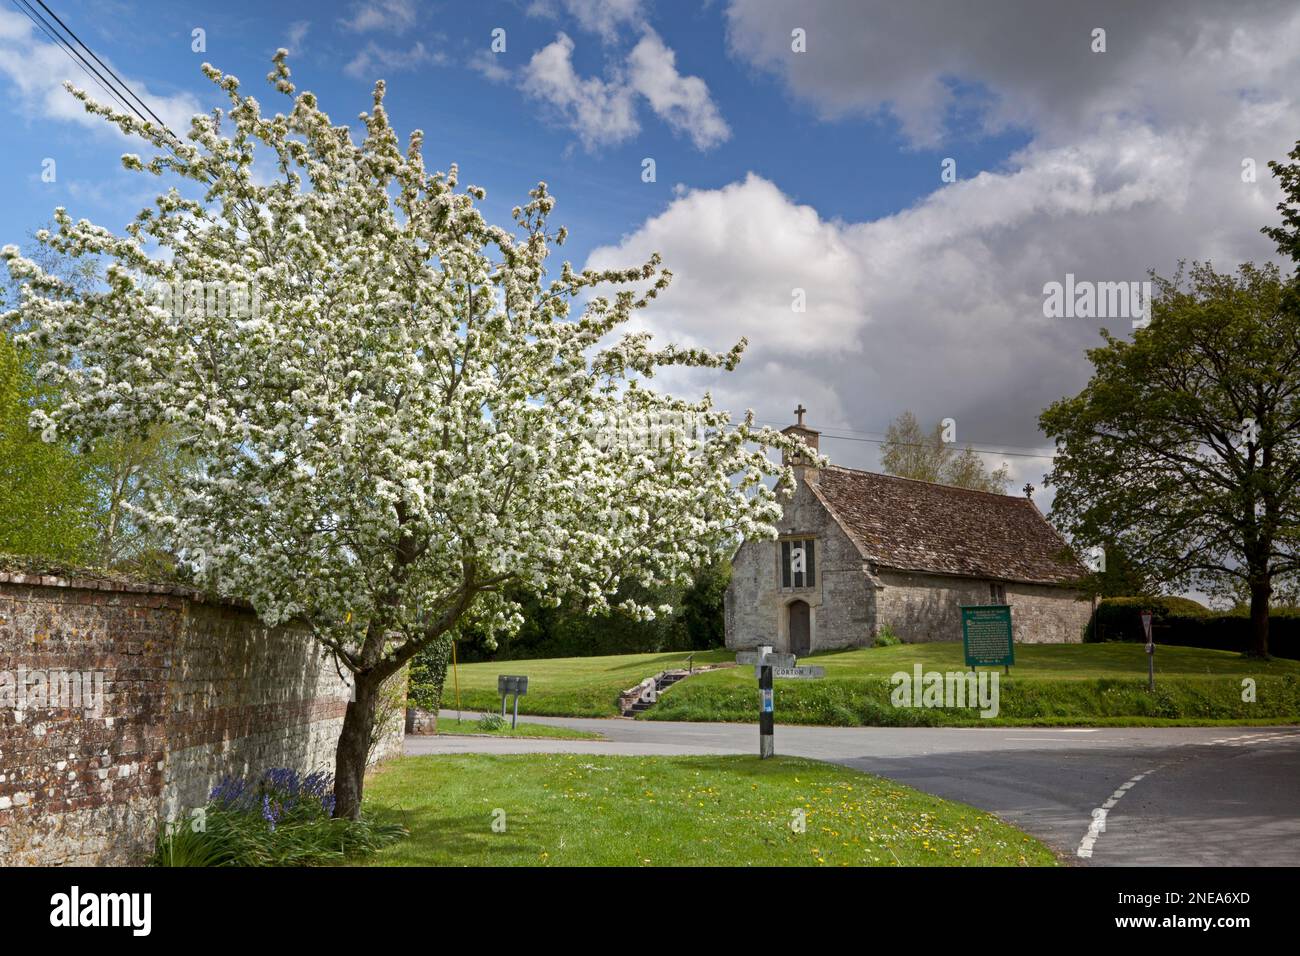 The Church of St. James in the village of Tytherington, near Warminster in Wiltshire. Stock Photo